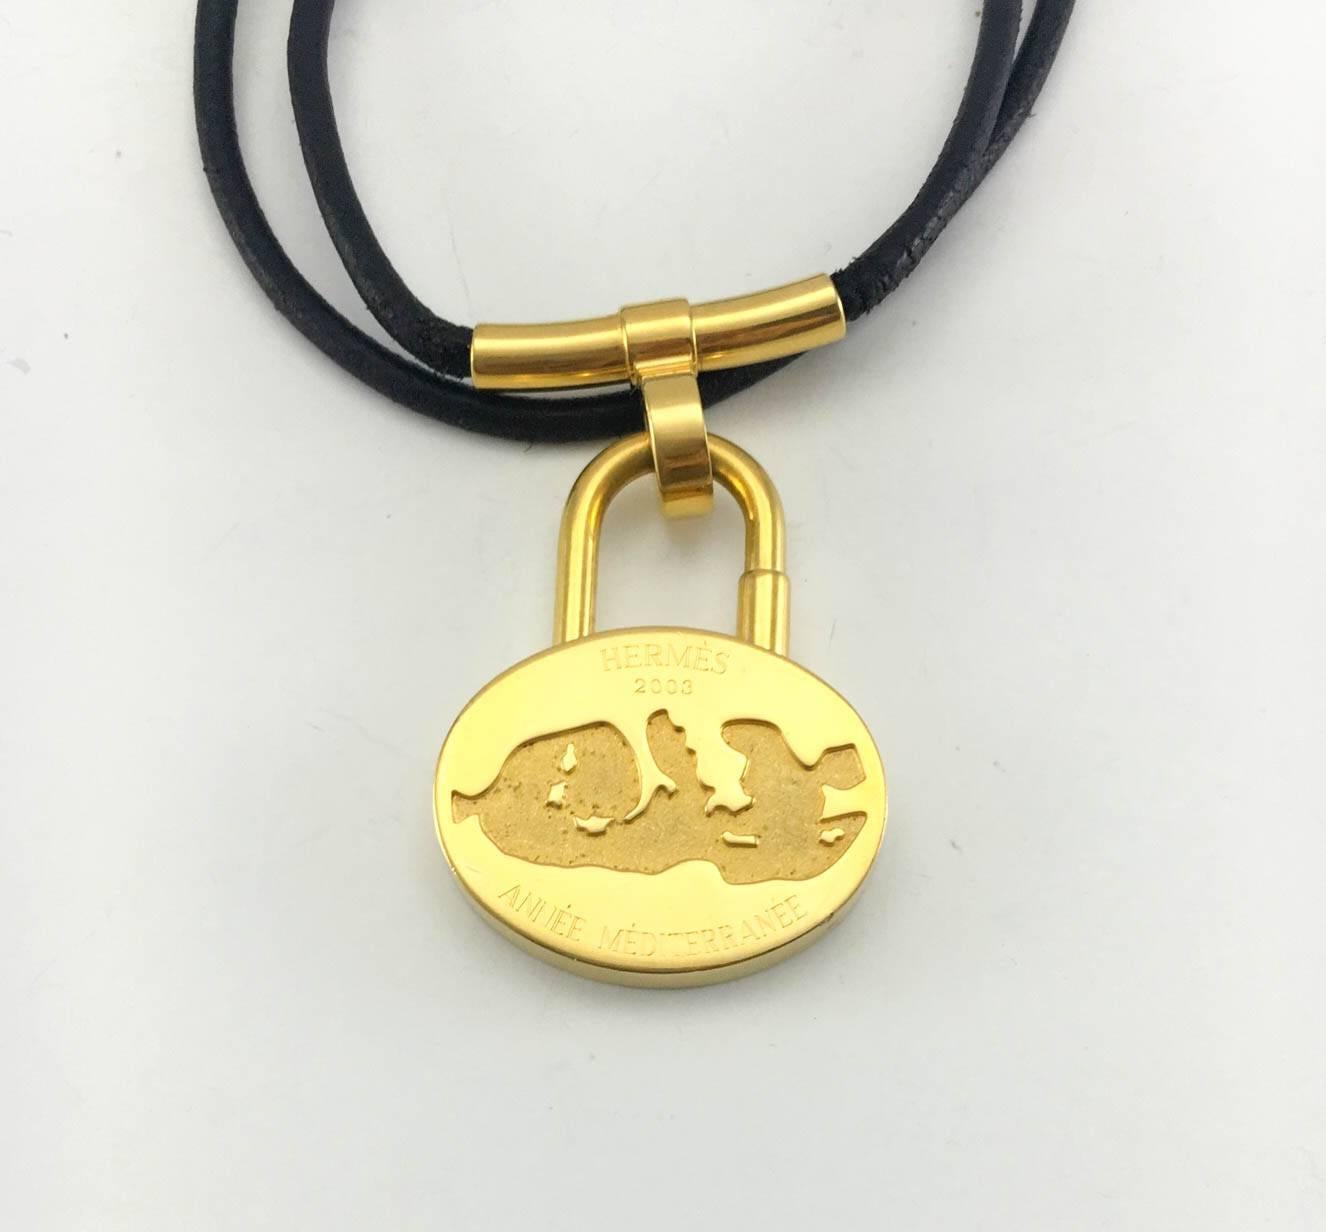 Hermes Gold-Plated Lock Pendant Necklace - 2003 In Excellent Condition In London, Chelsea